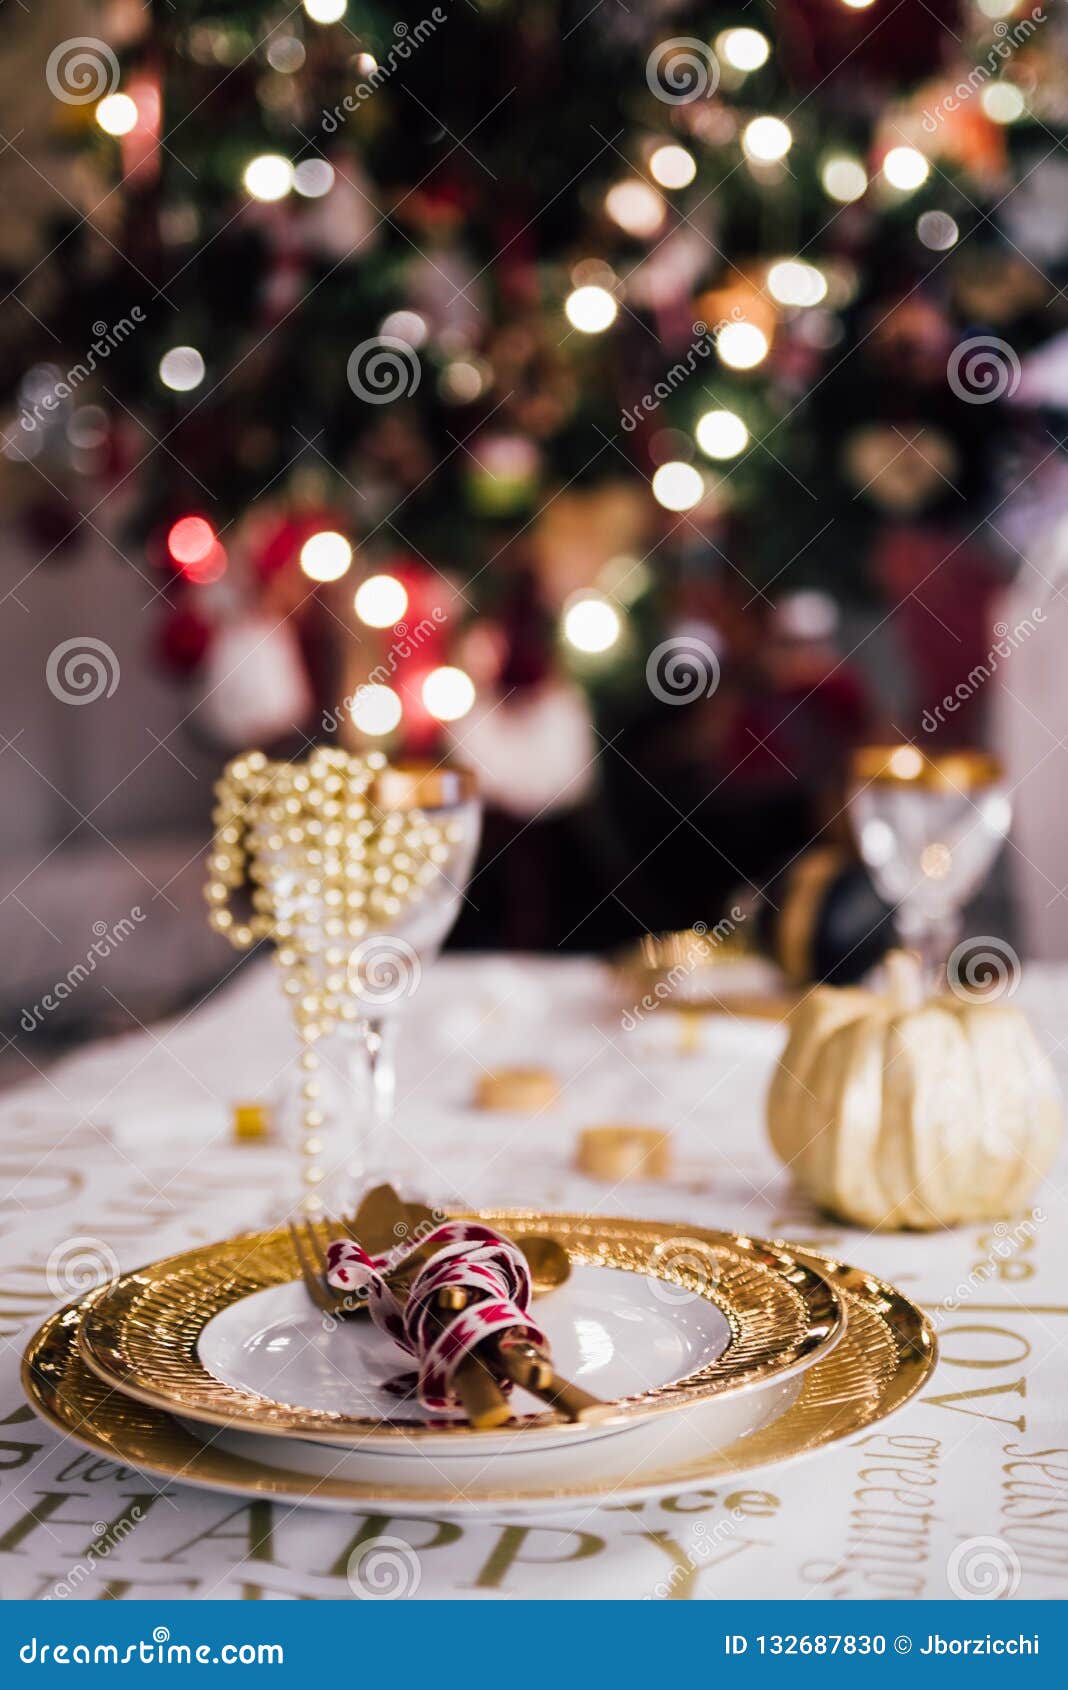 New year table setting stock photo. Image of gold, decoration - 132687830